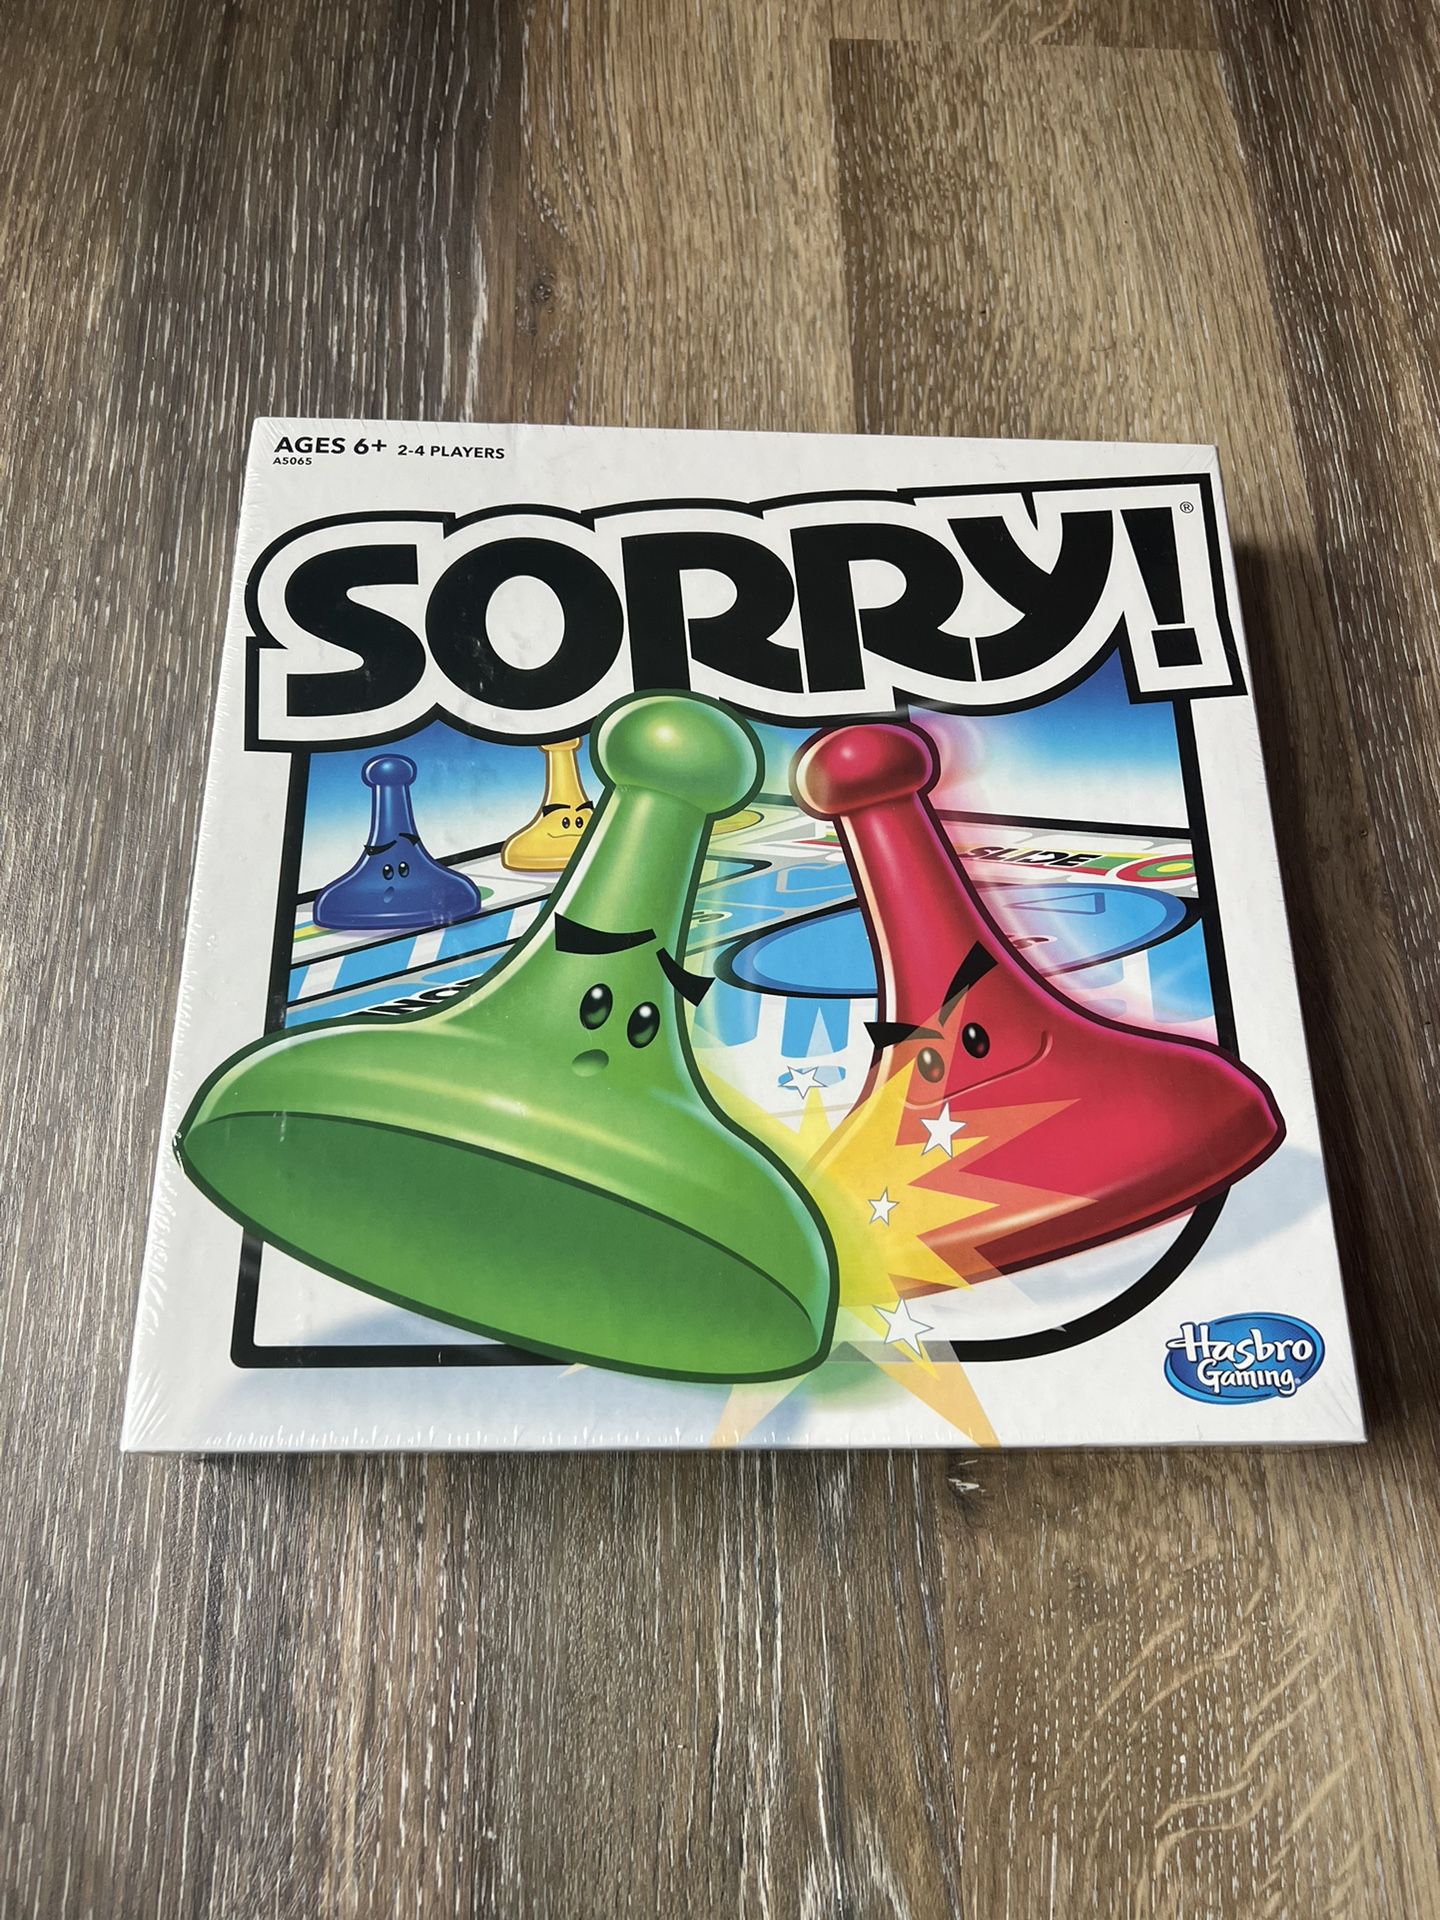 Sorry! Board Game Hasbro 2016 New & Sealed